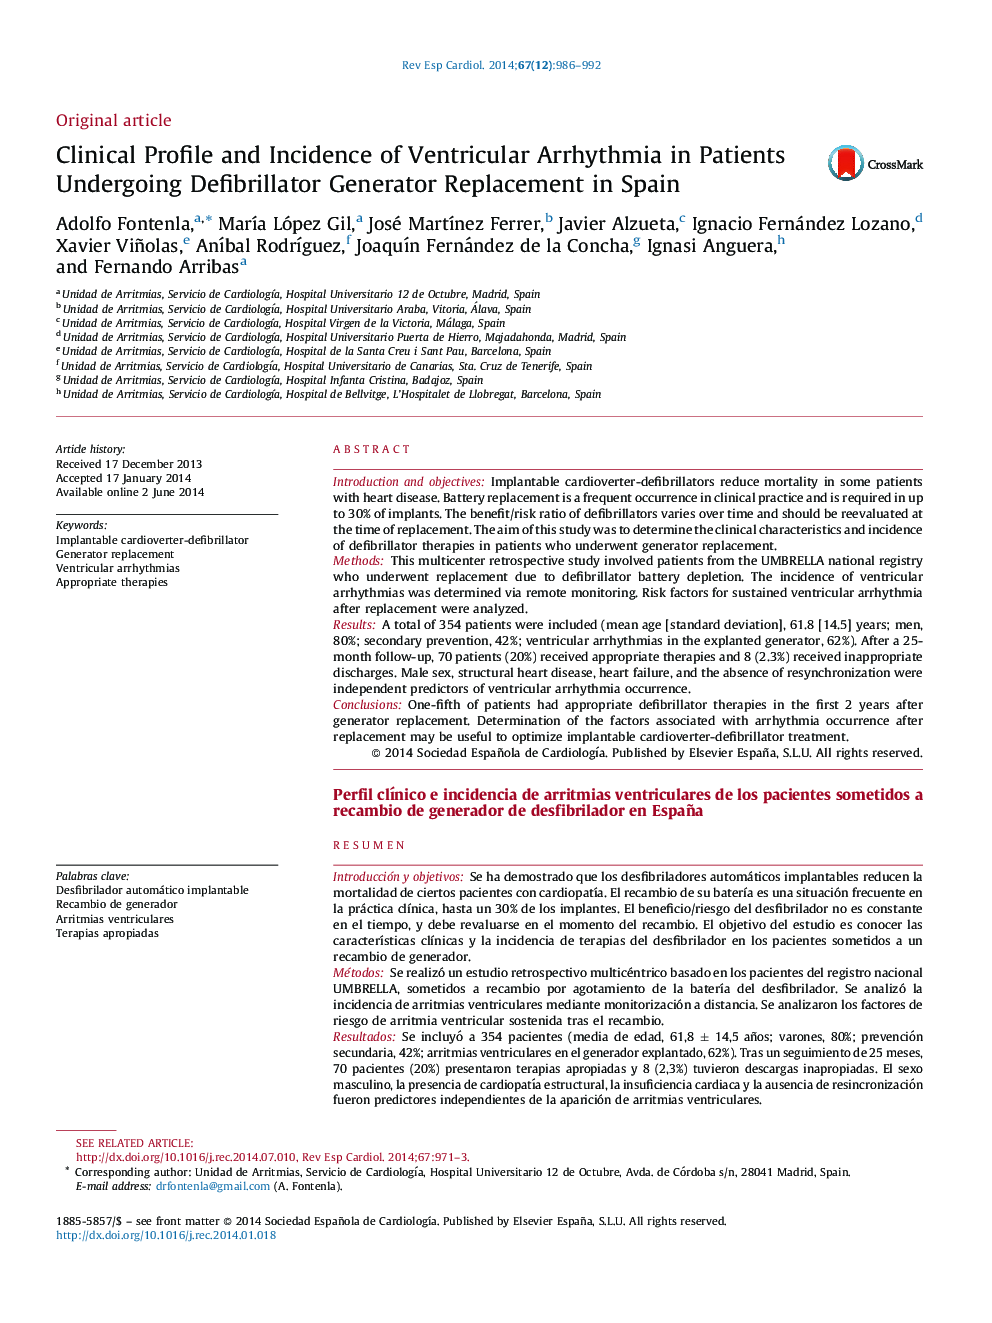 Clinical Profile and Incidence of Ventricular Arrhythmia in Patients Undergoing Defibrillator Generator Replacement in Spain